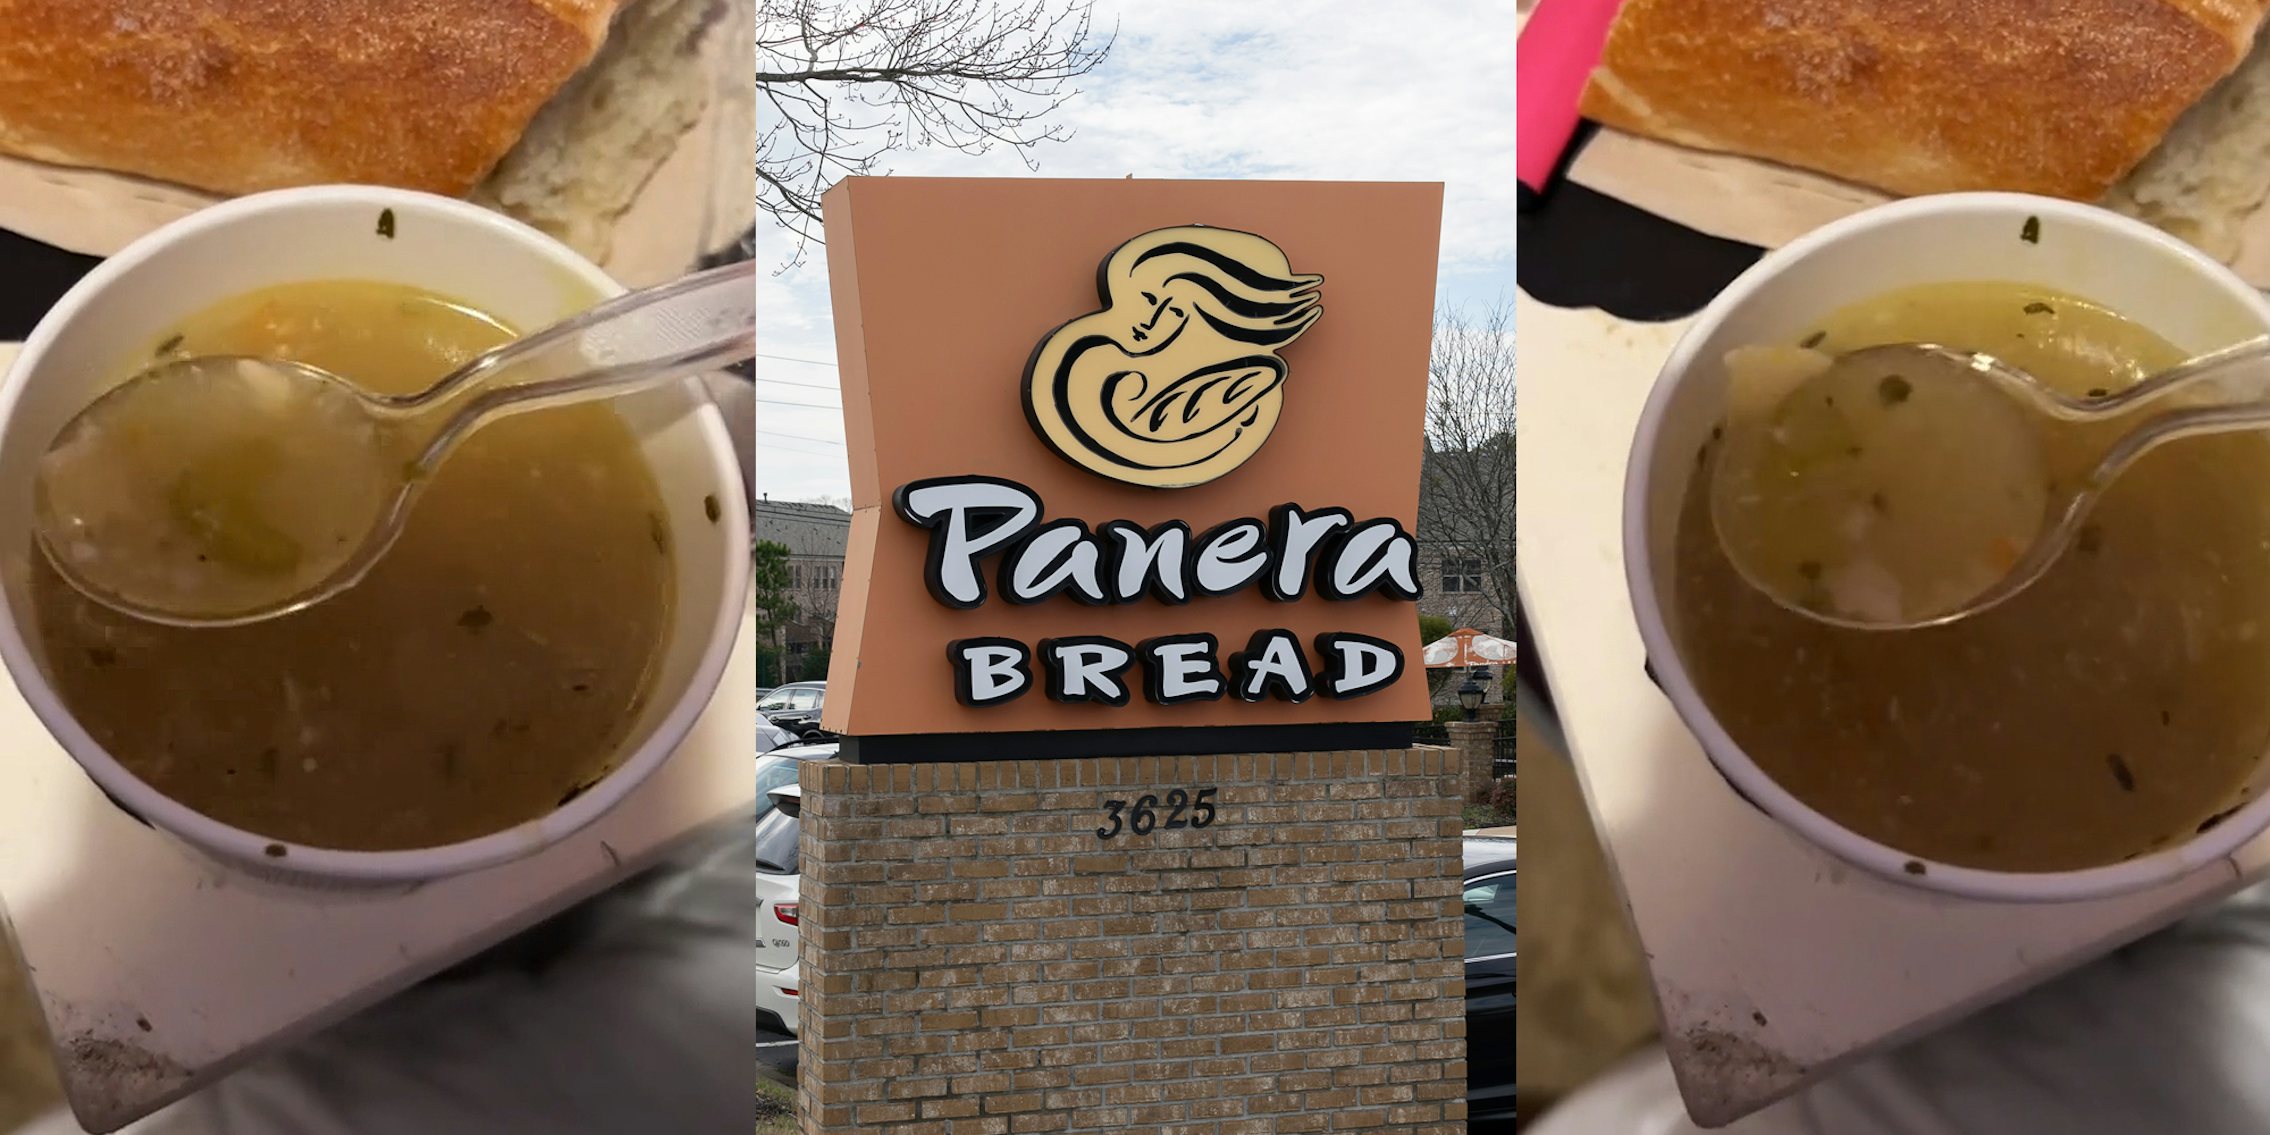 Panera's chicken noodle soup with mostly broth (l) Panera Bread sign outside (c) Panera's chicken noodle soup with mostly broth (r)